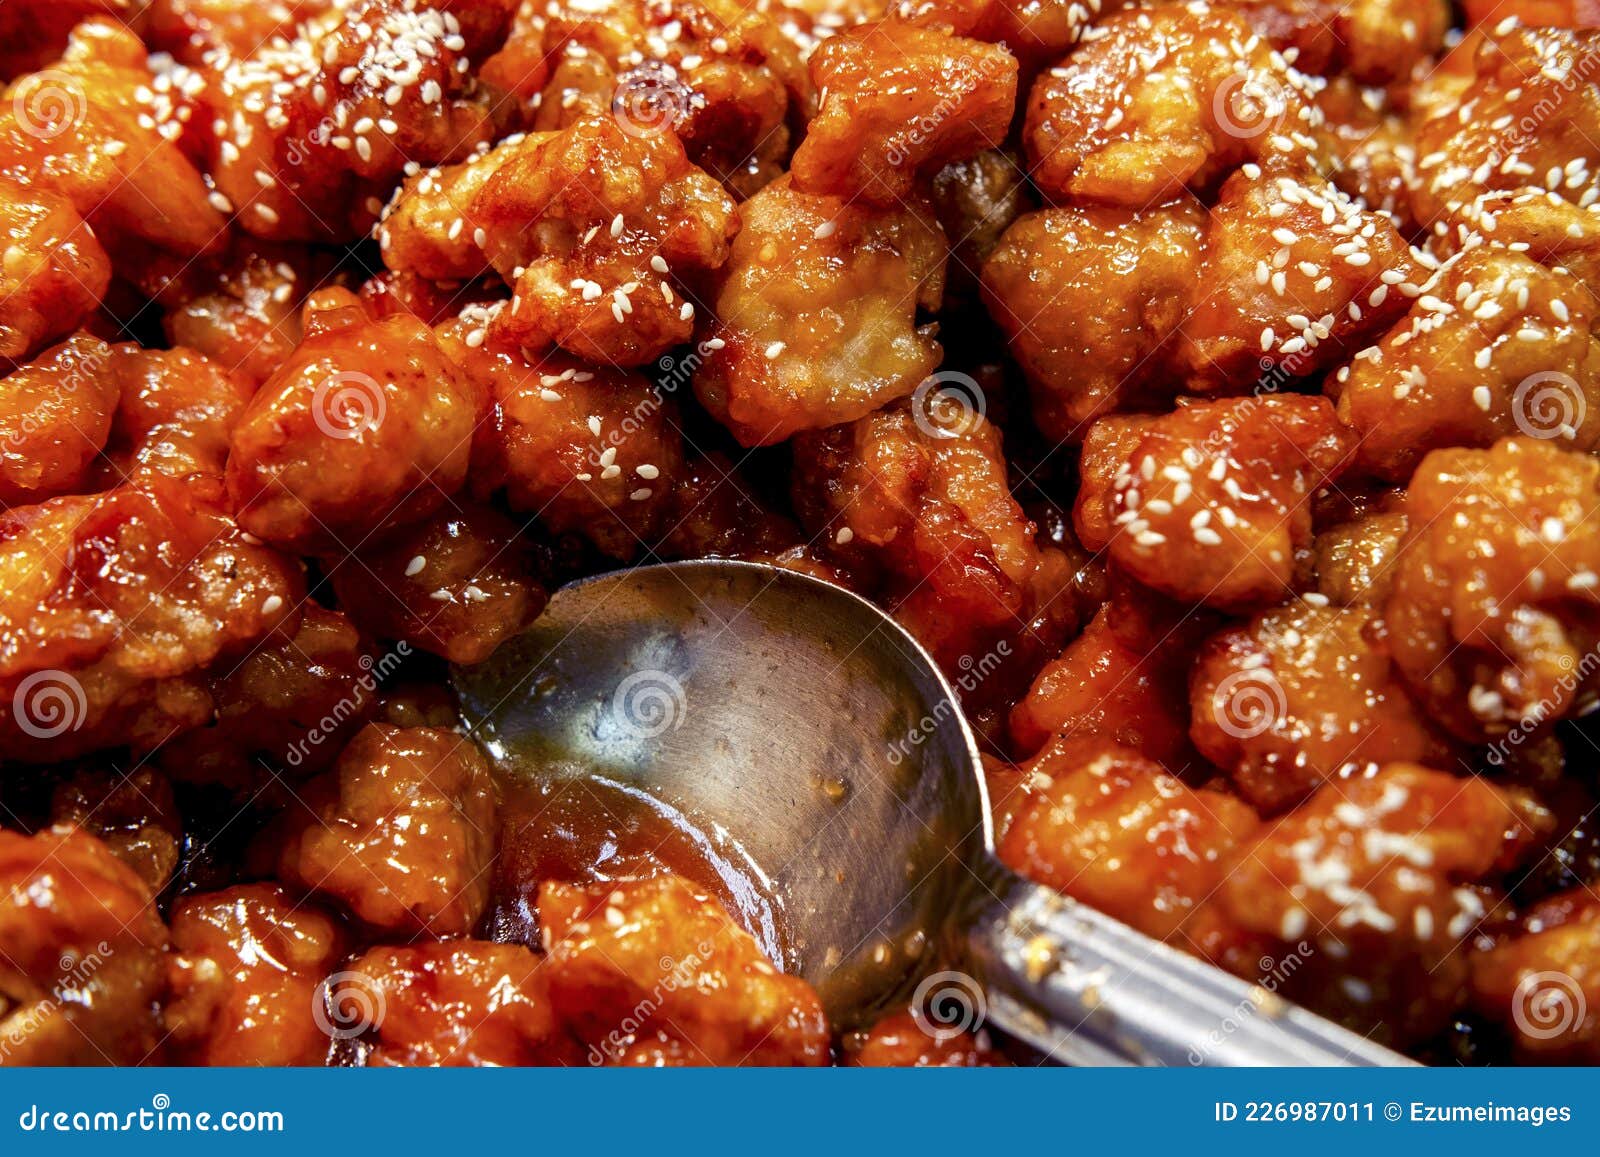 Chinese Buffet Sesame Chicken Stock Image - Image of cafeteria, cuisine:  226987011